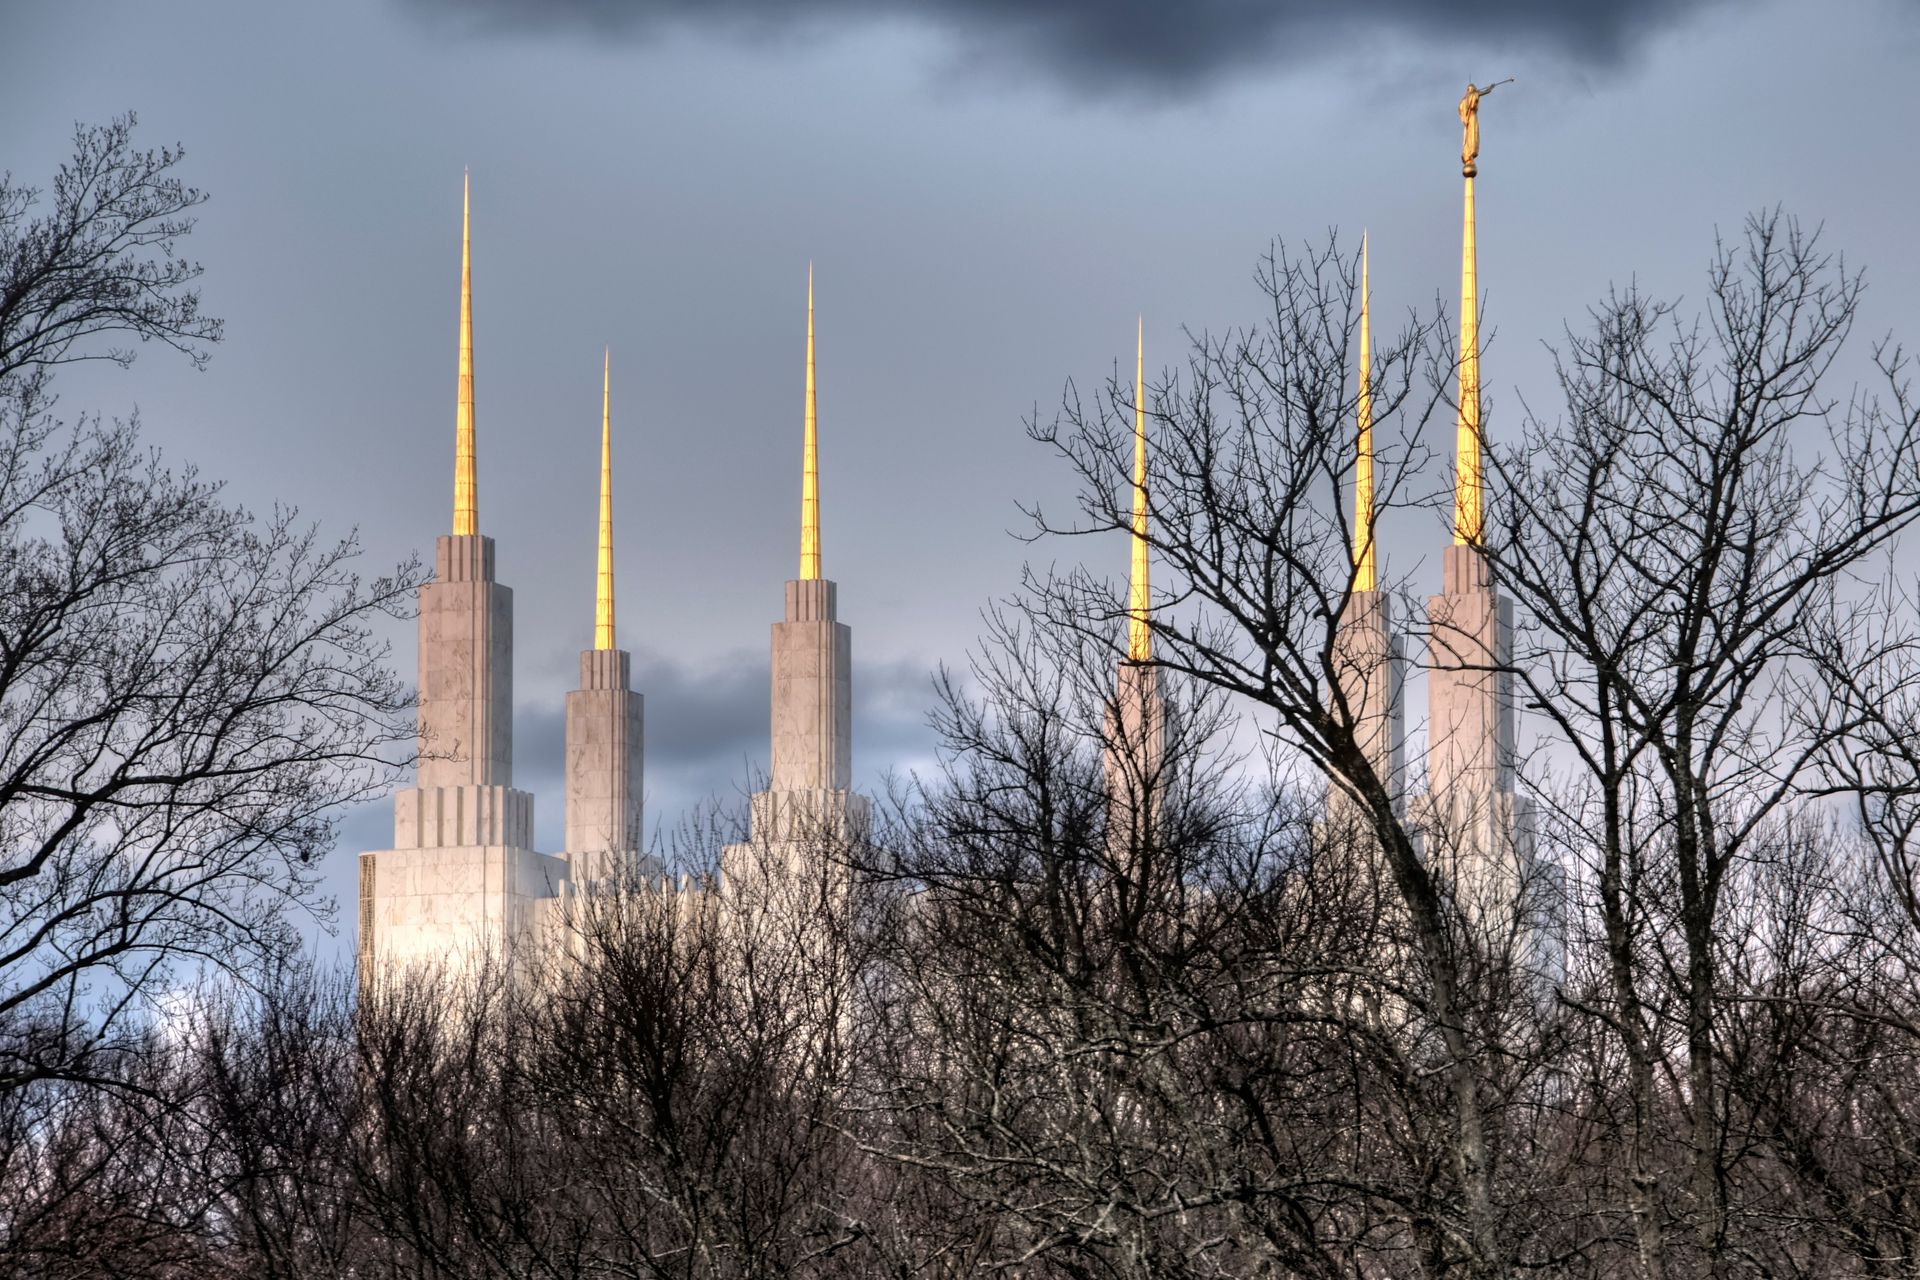 The Washington D.C. Temple spires, with trees.